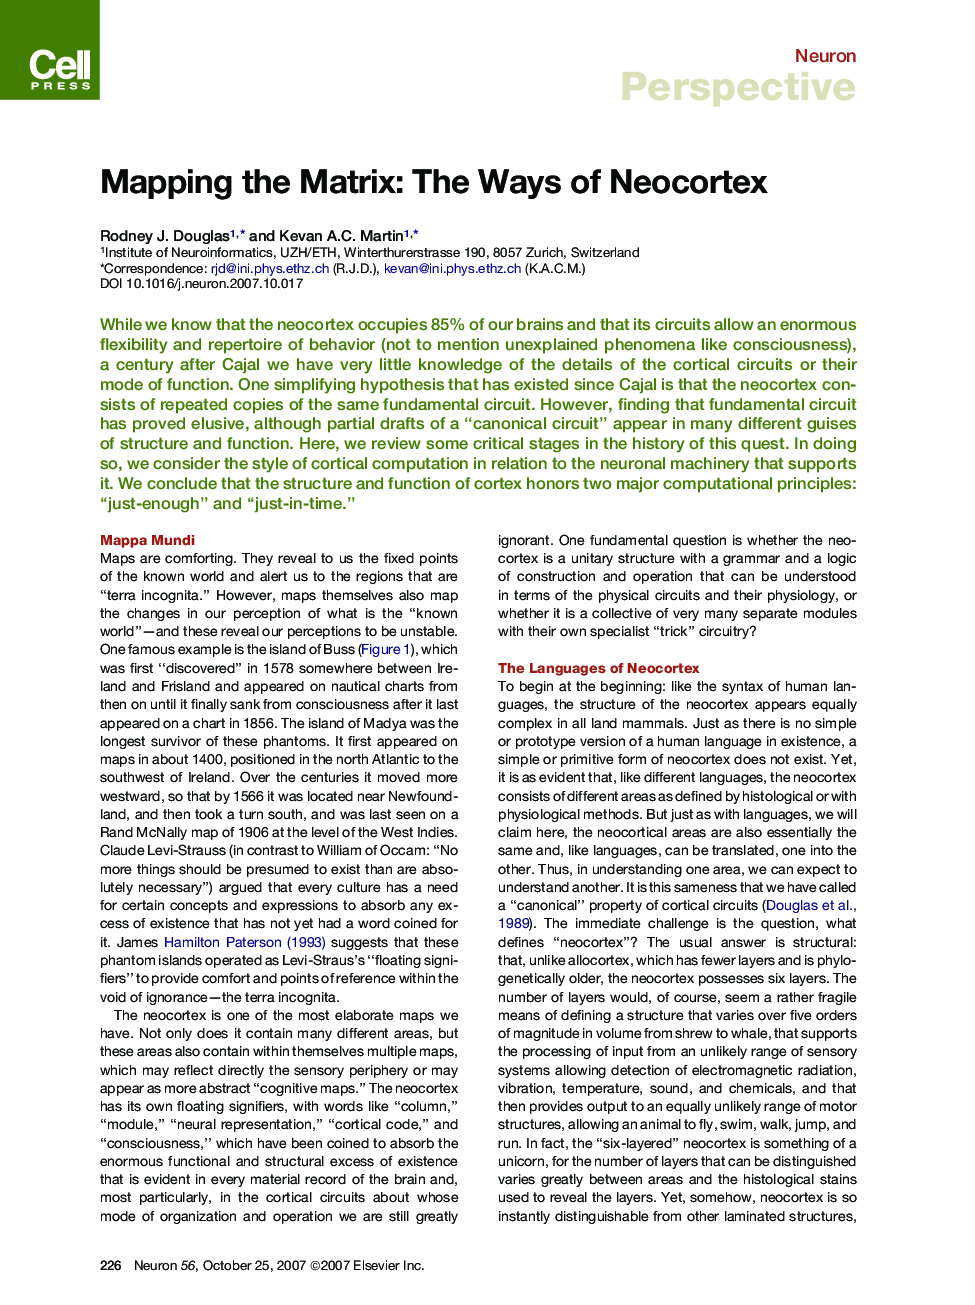 Mapping the Matrix: The Ways of Neocortex